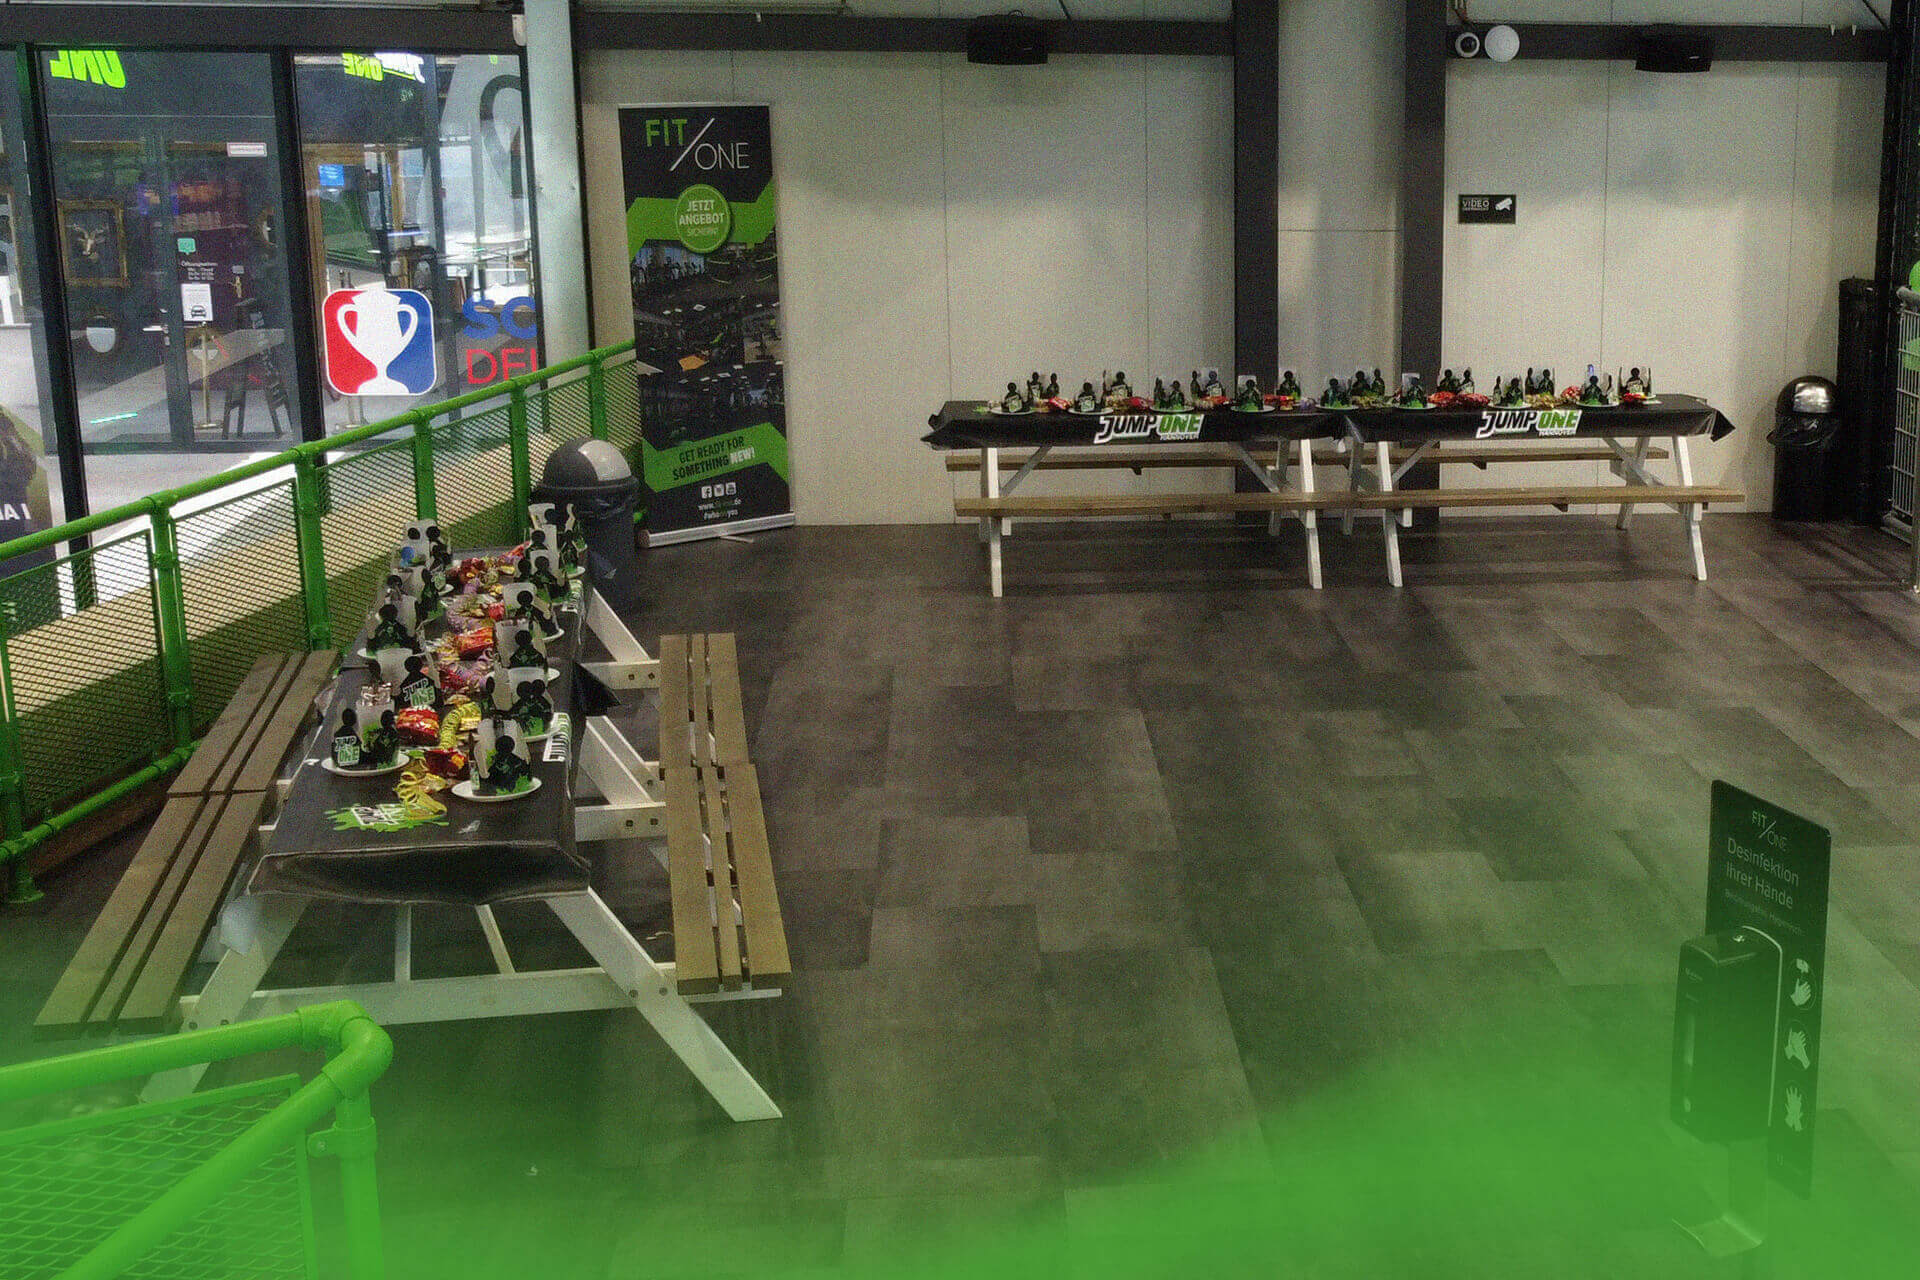 Preise   JUMP/ONE Trampolinpark Hannover #definegravity